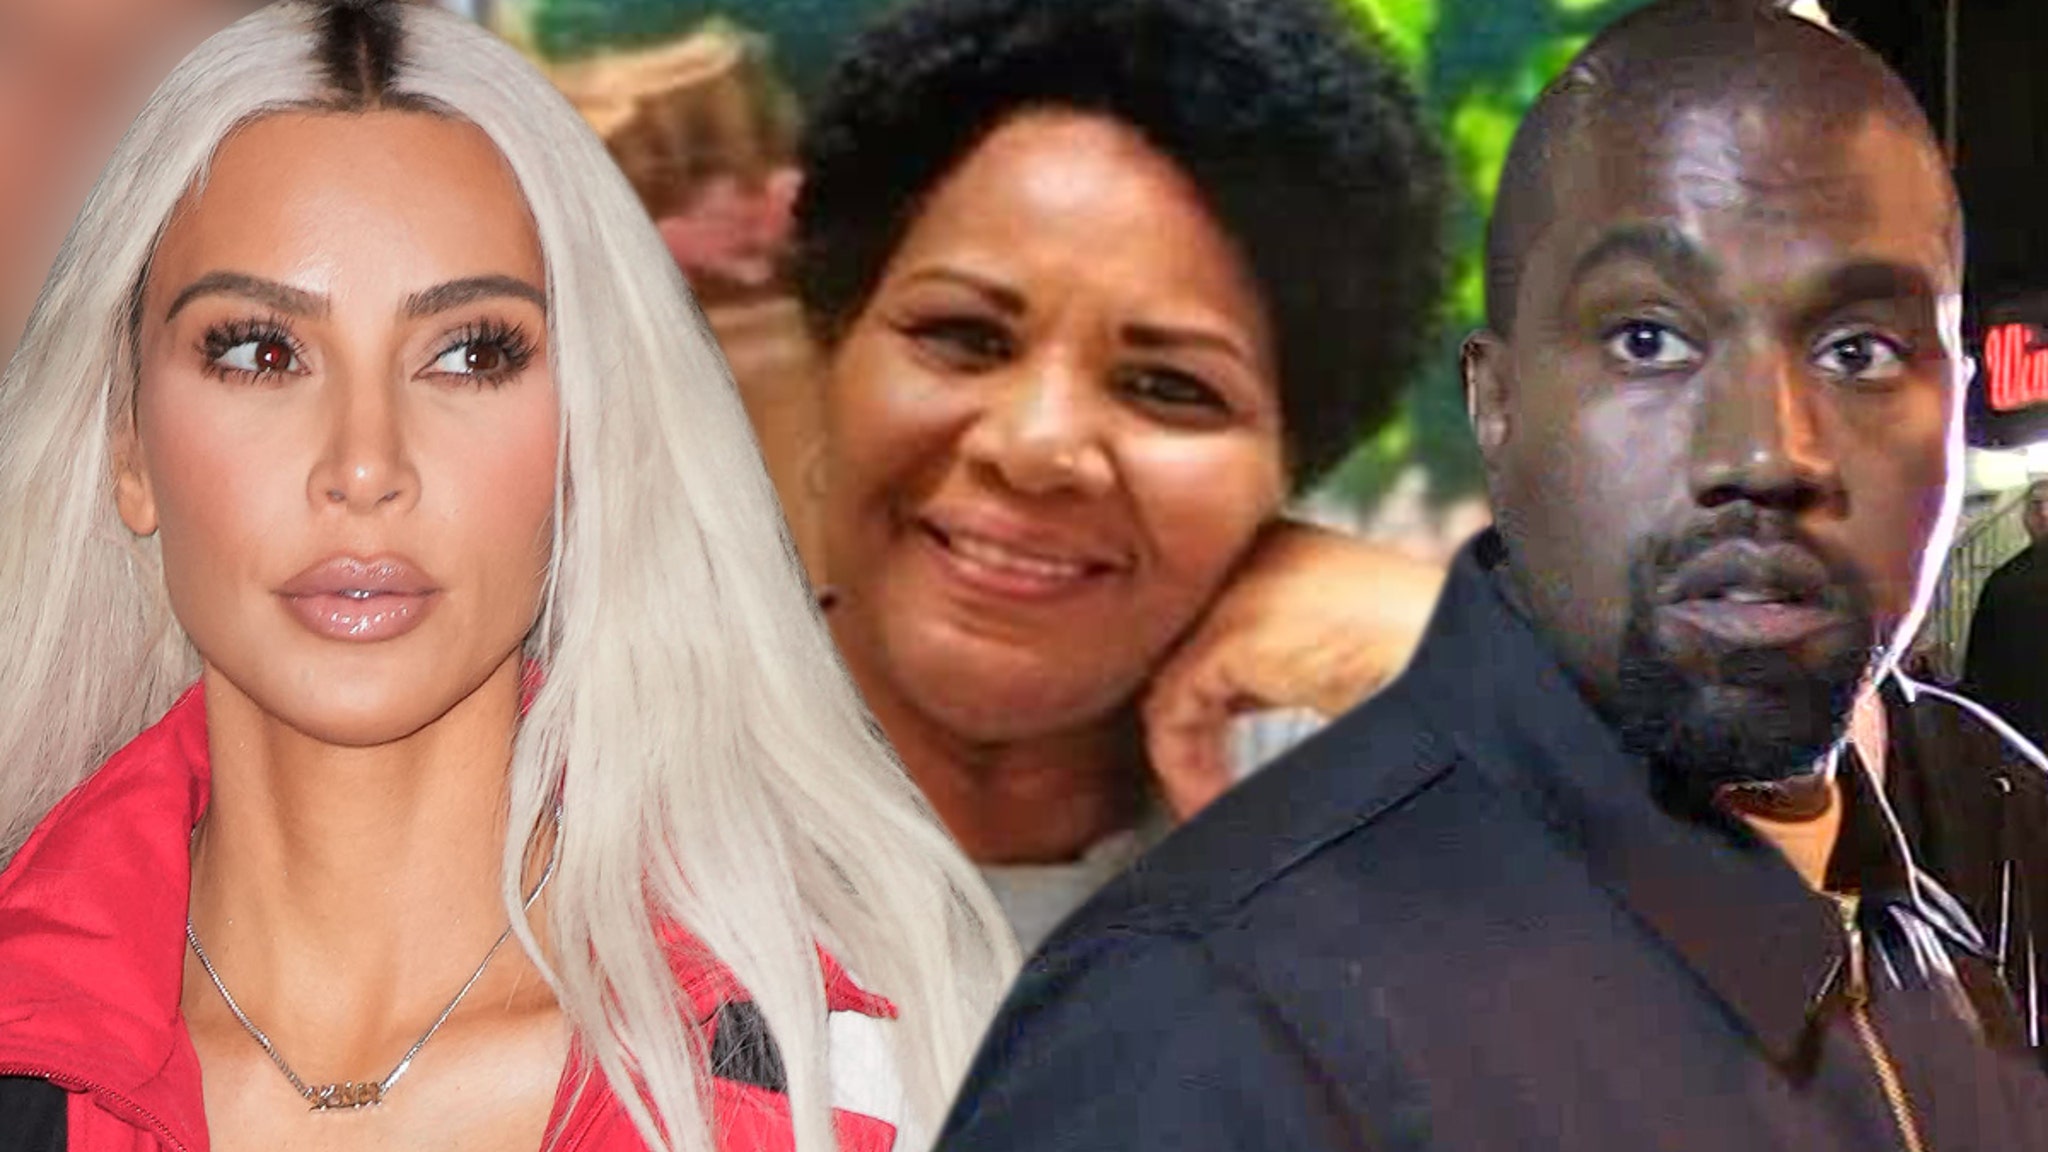 Kanye Claims Trump Credits Him for Freeing Alice Marie Johnson, But She Says It was Kim